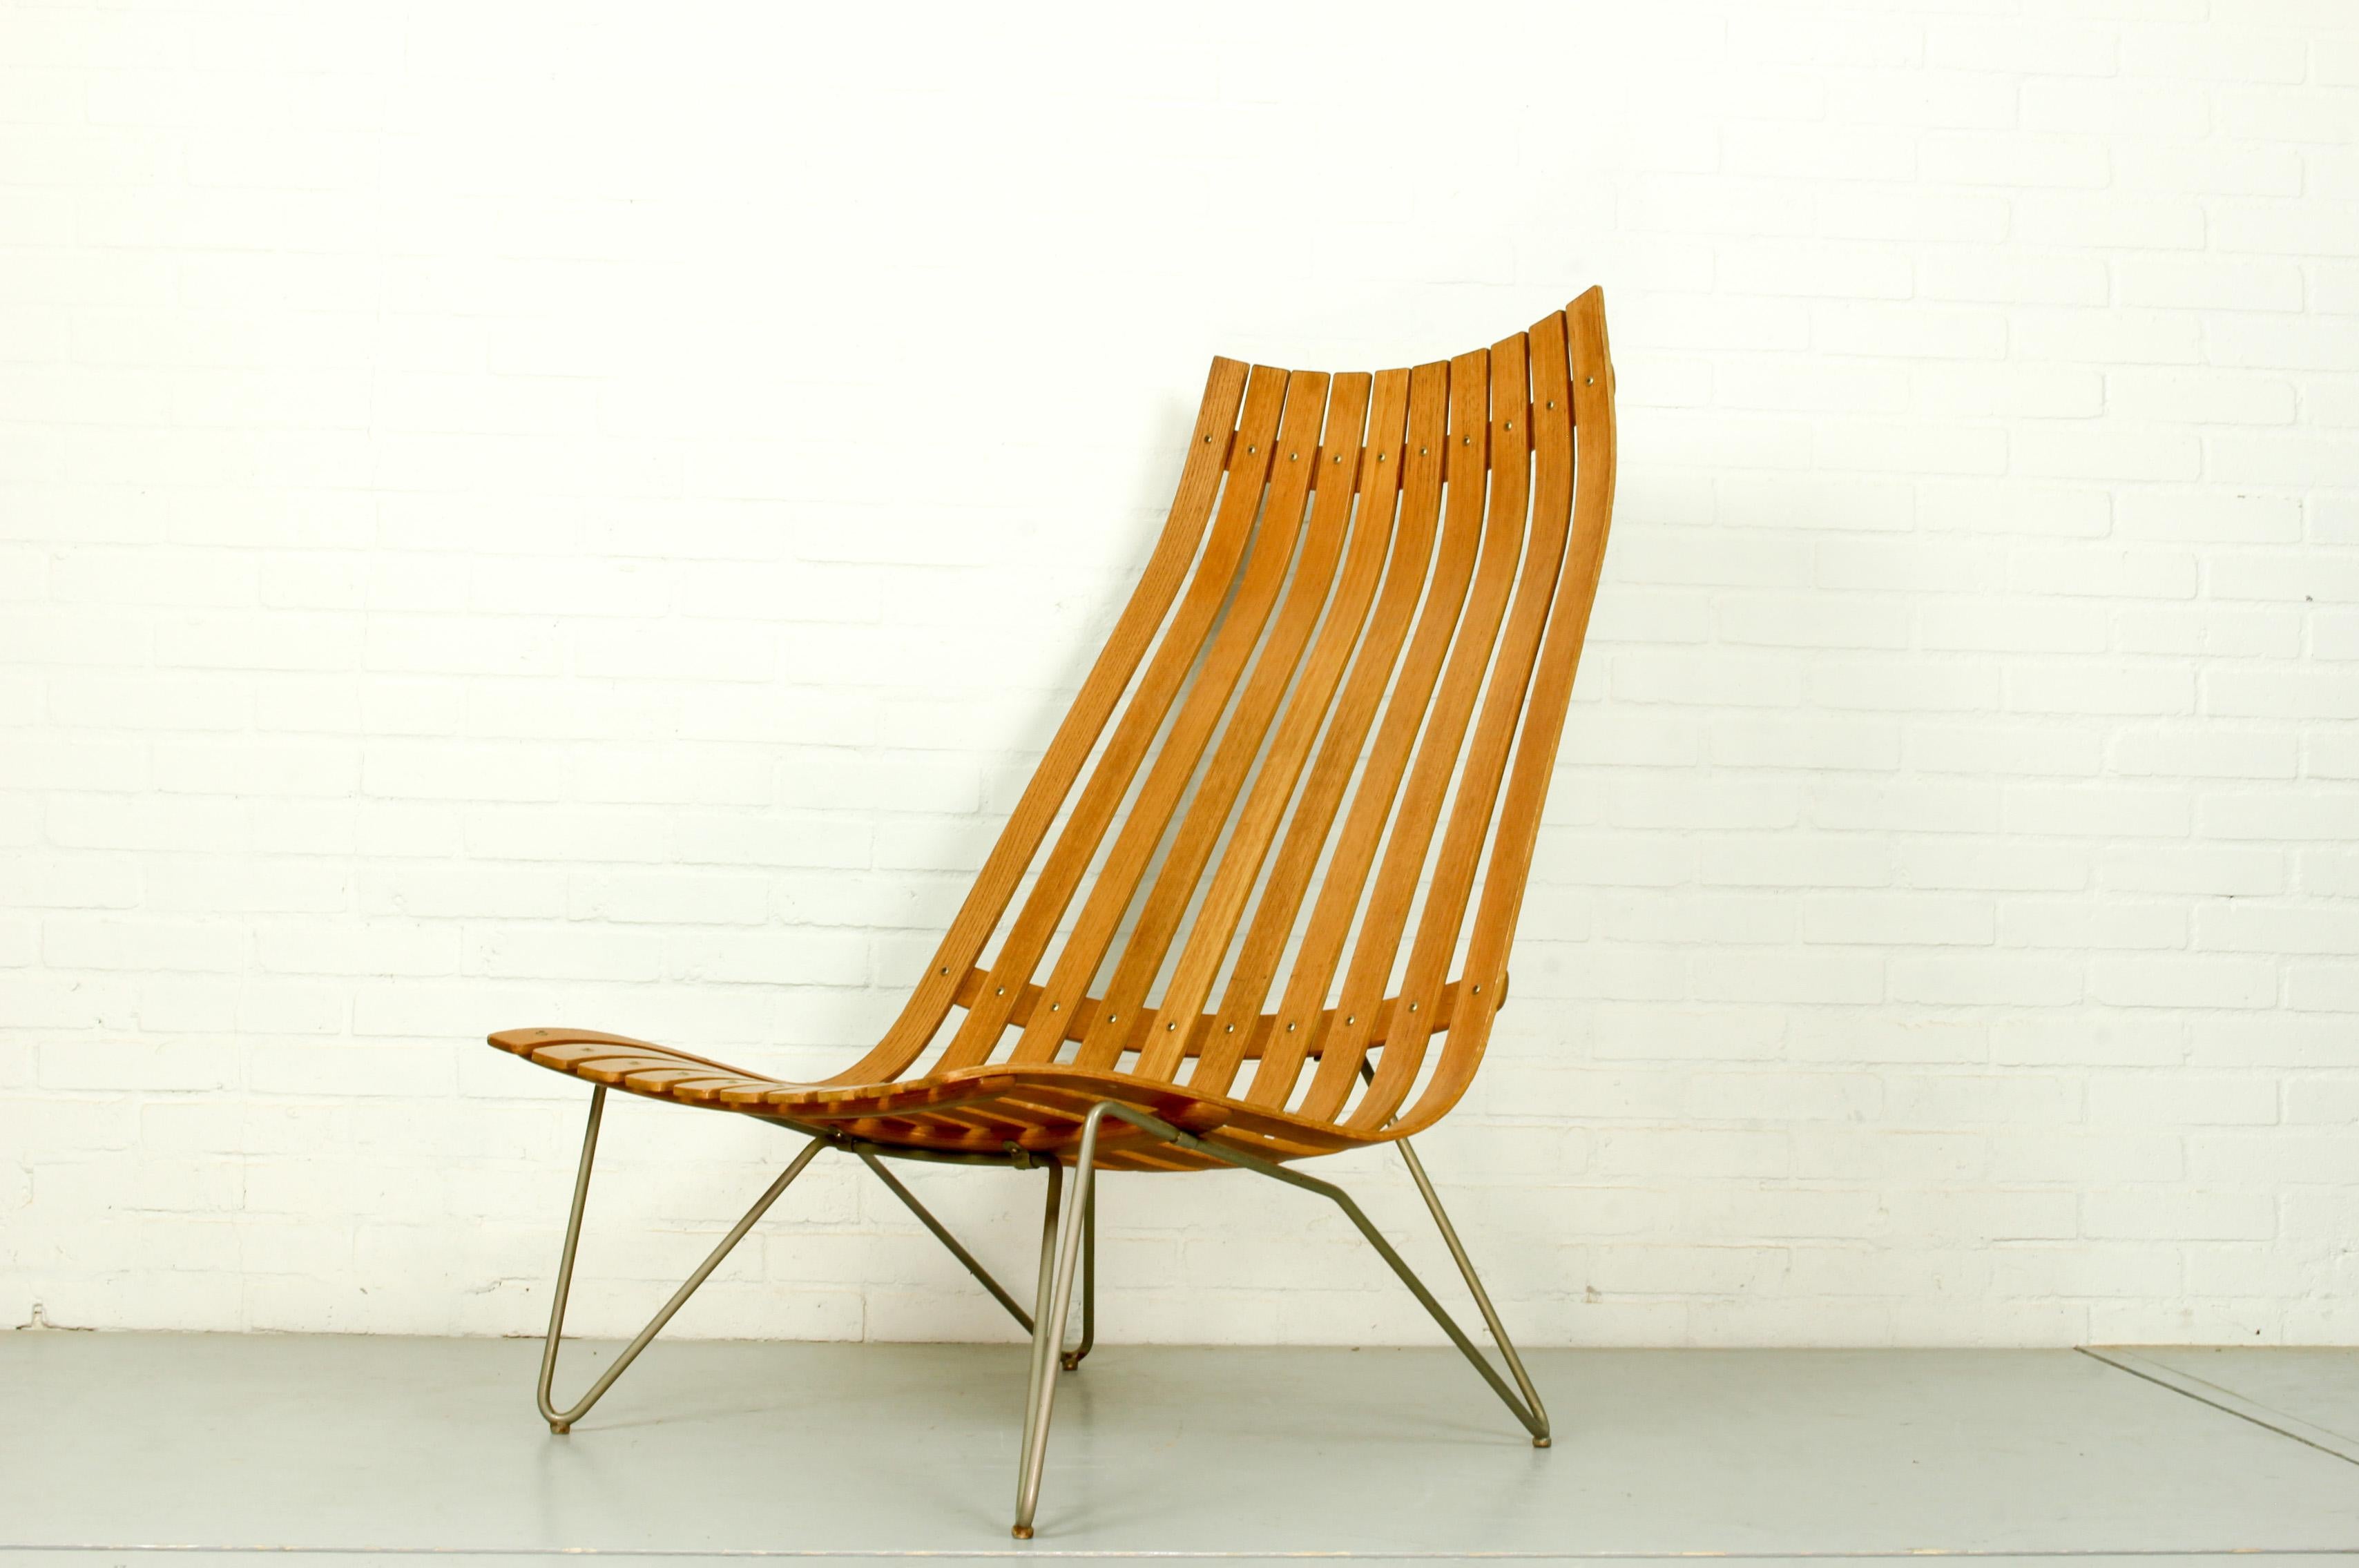 Beautiful sculptural lounge chair designed by Hans Brattrud and manufactured by Hove Mobler, Norway 1957. The seating is composed with several plywood veneered slats finished with a teak fineer. The base is made from nickel-plated steel. This chair